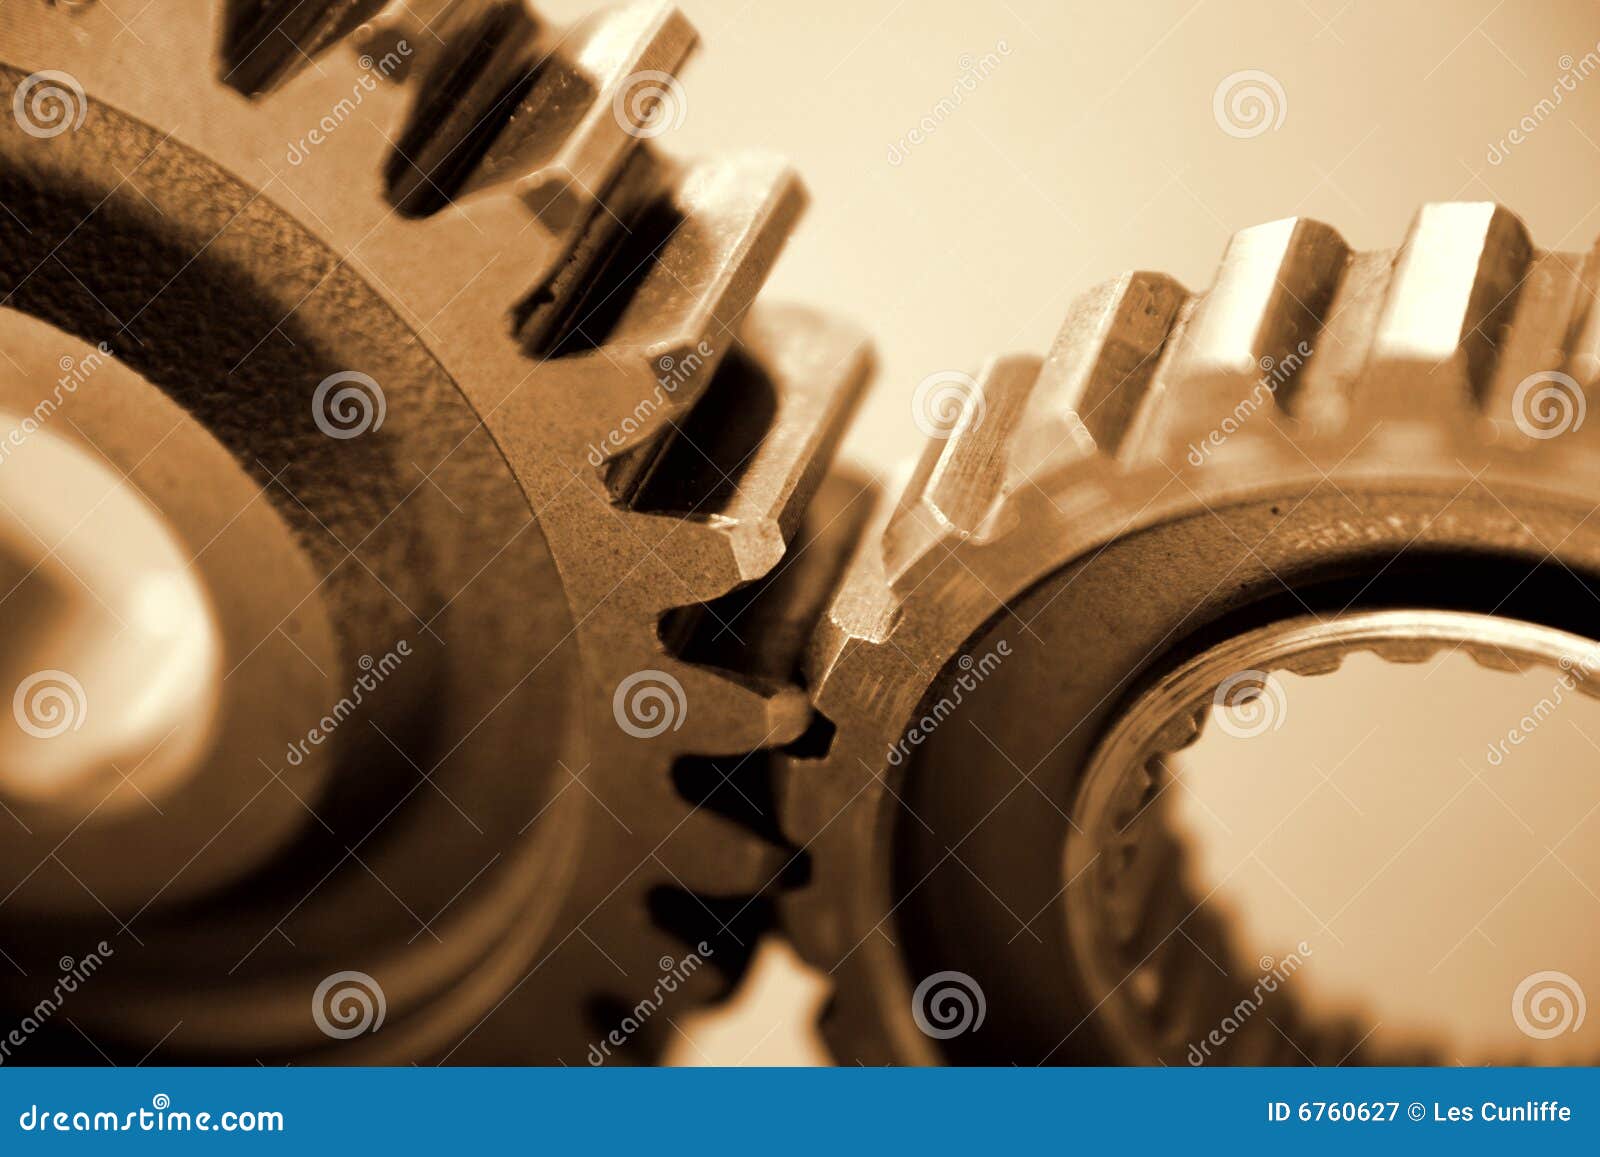 machine gears or cogs